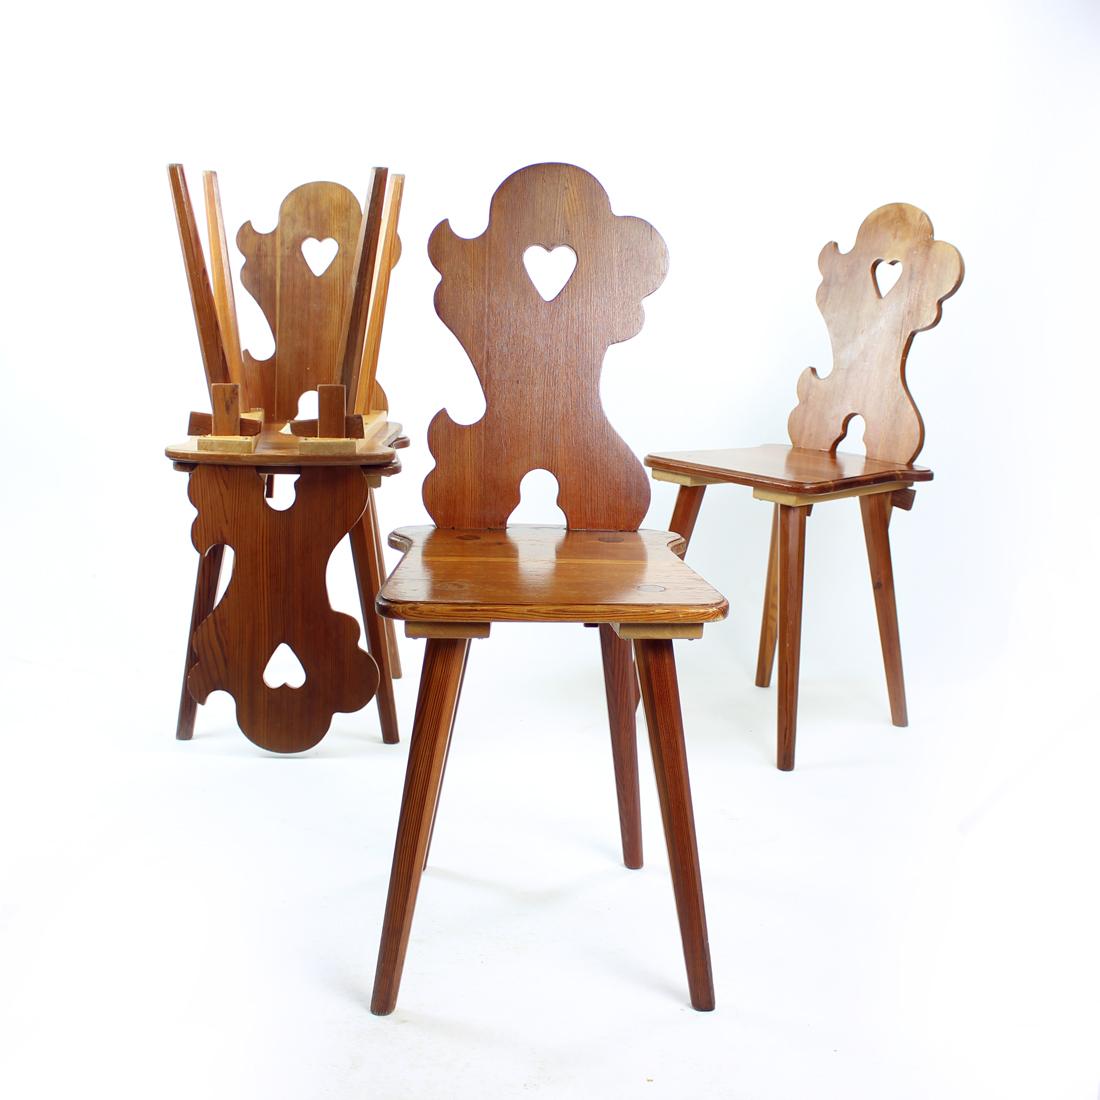 Varnished Set of 2 Dining Chairs in Folk Design, Czechoslovakia, 1973 For Sale